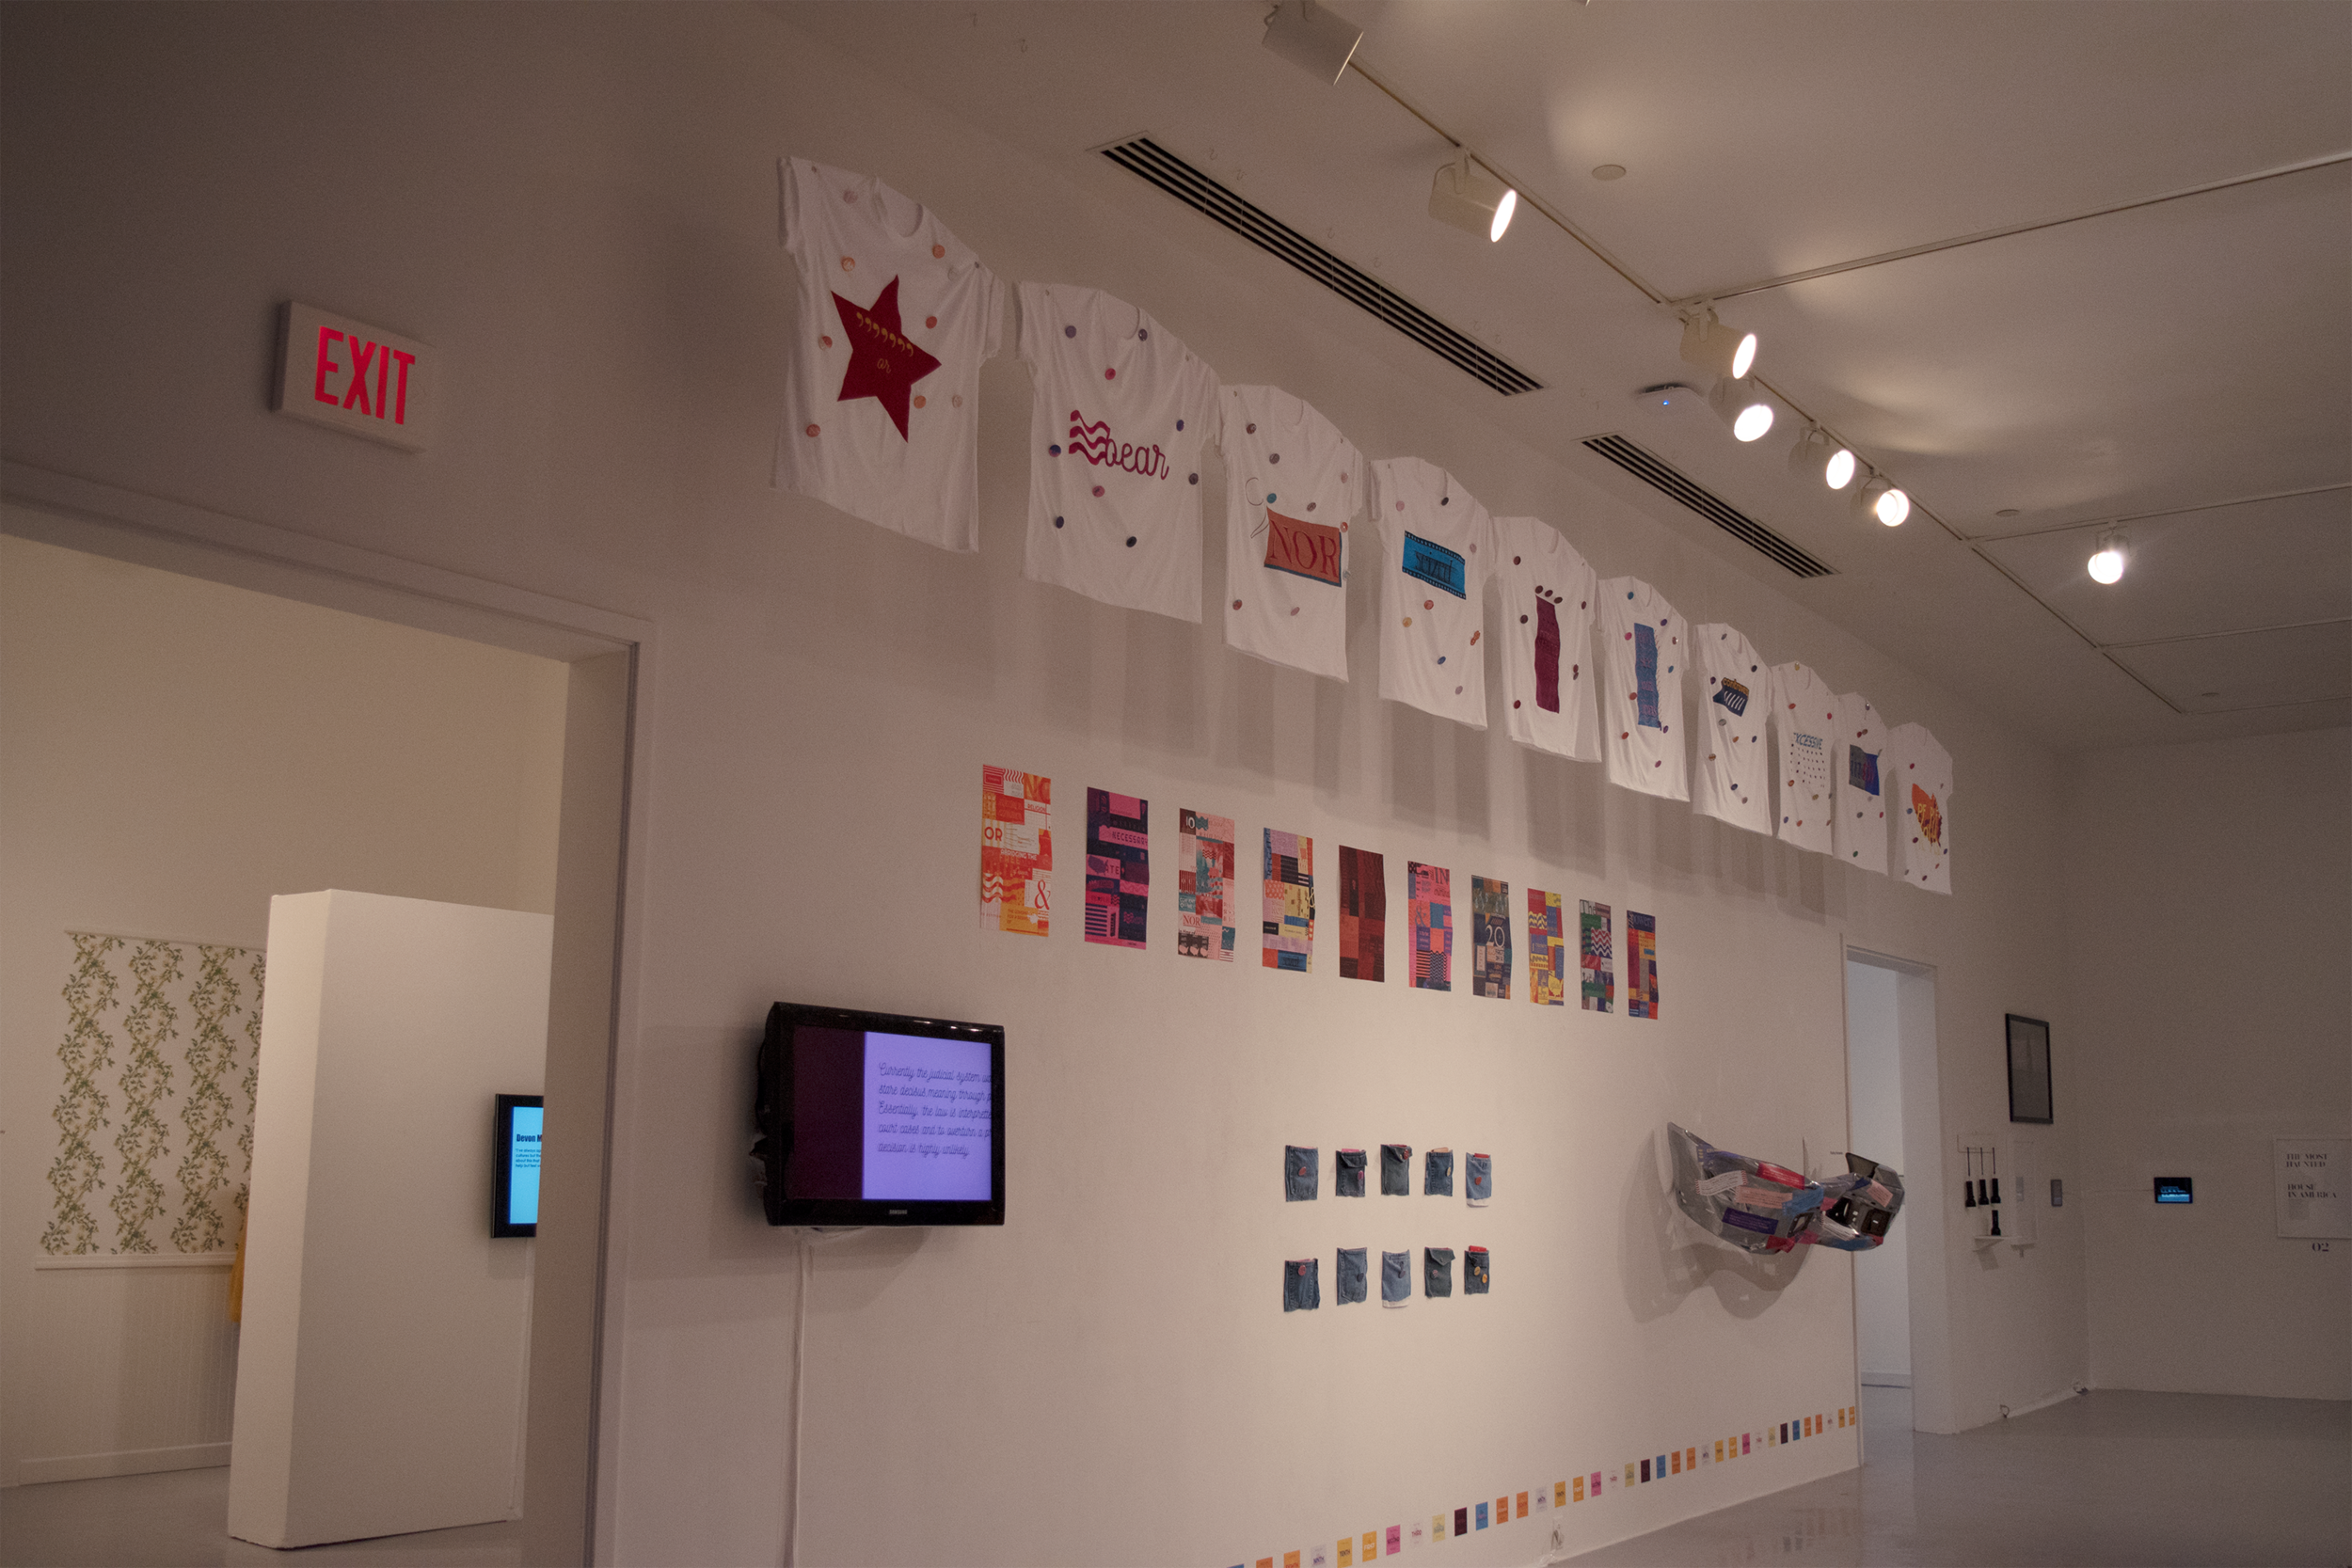  The installation included posters, t-shirts, pins, stickers, zines, and a video. 